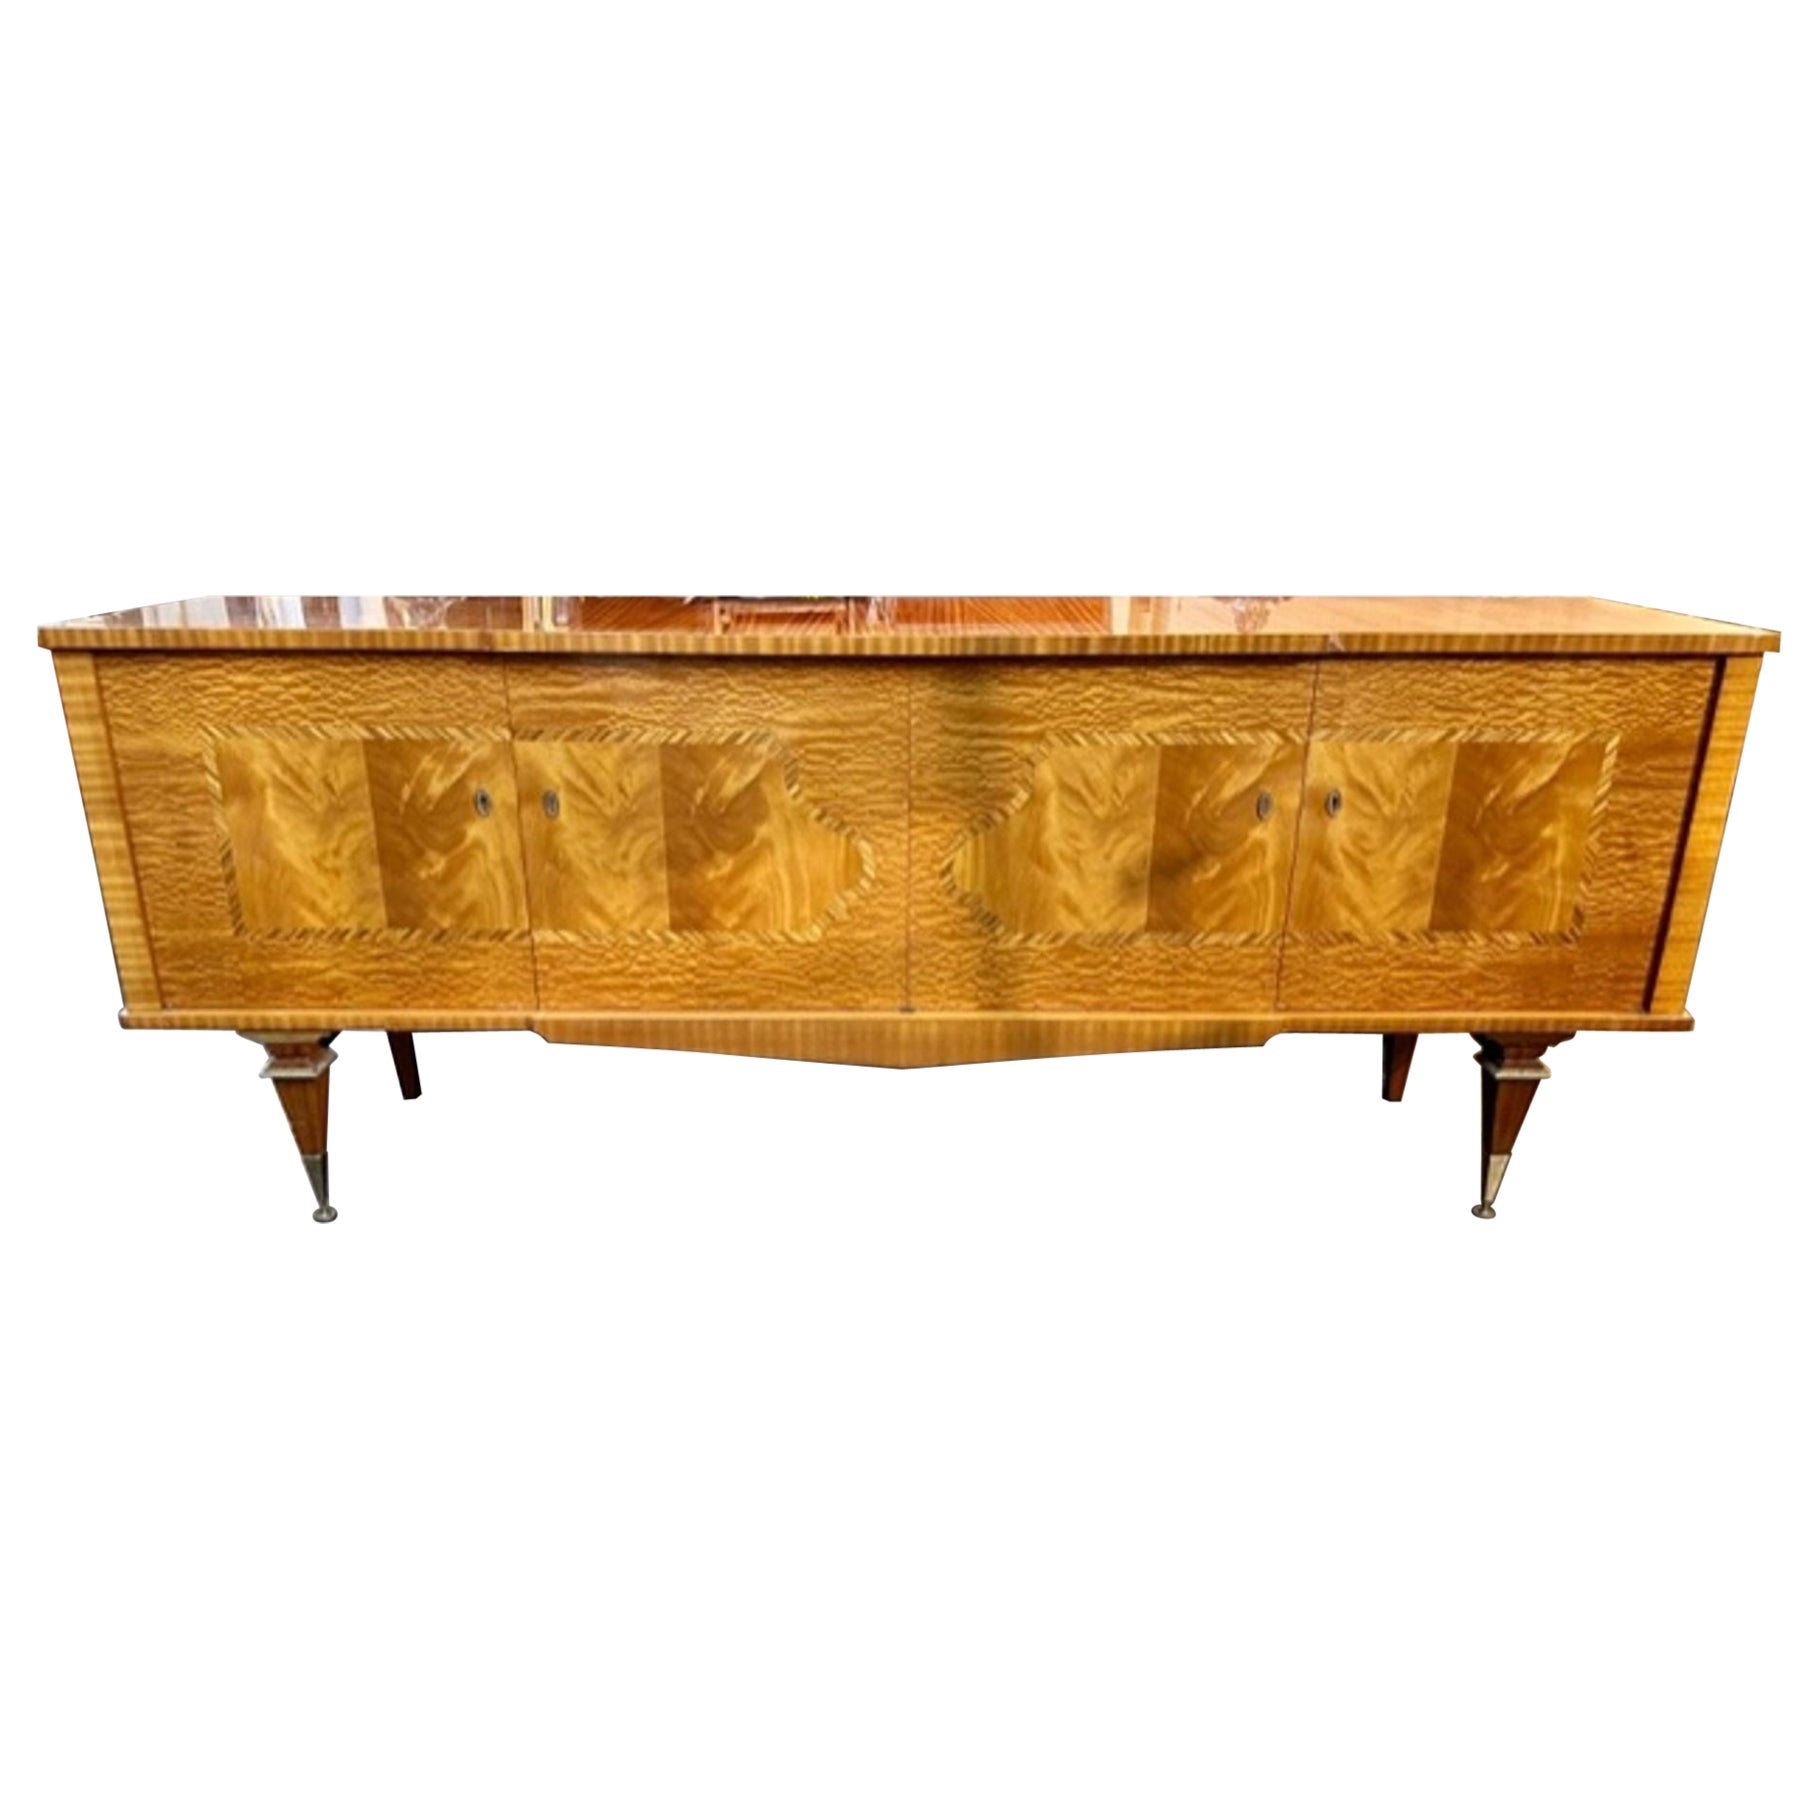 Large Scale Midcentury French Art Deco Style Side Board